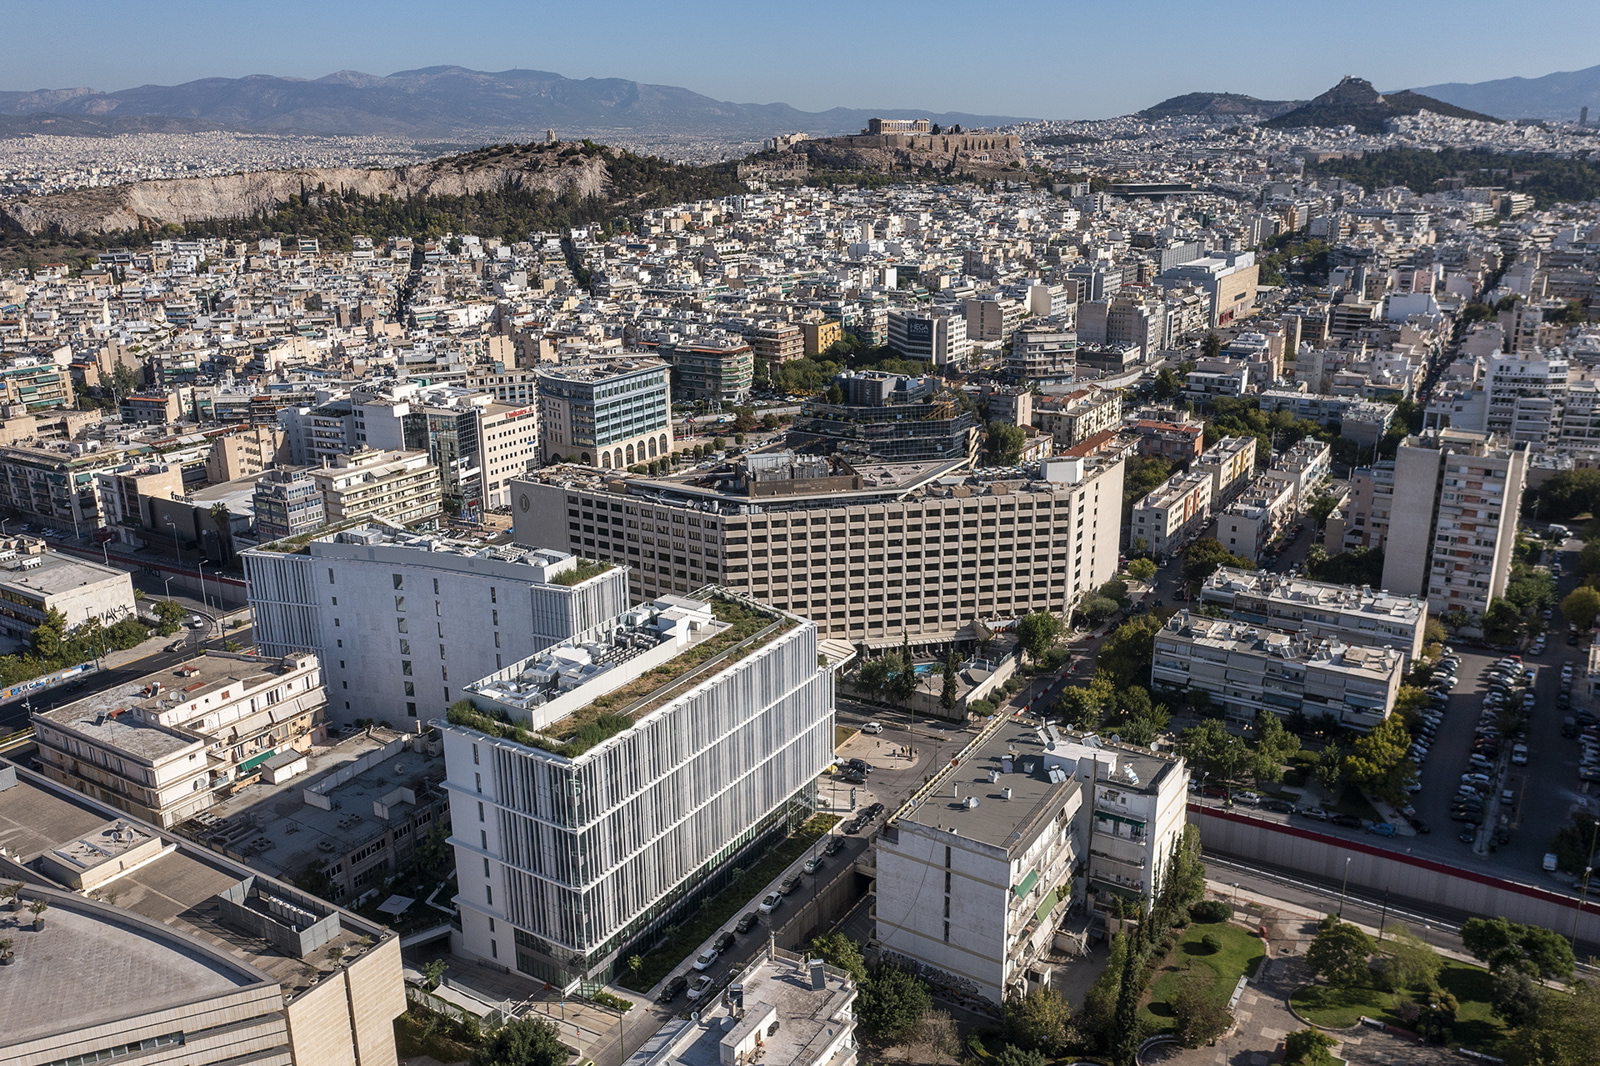 Archisearch Syggrou Office Complex in Athens by Divercity Architects & Bennetts Associates for developer Dimand S.A.